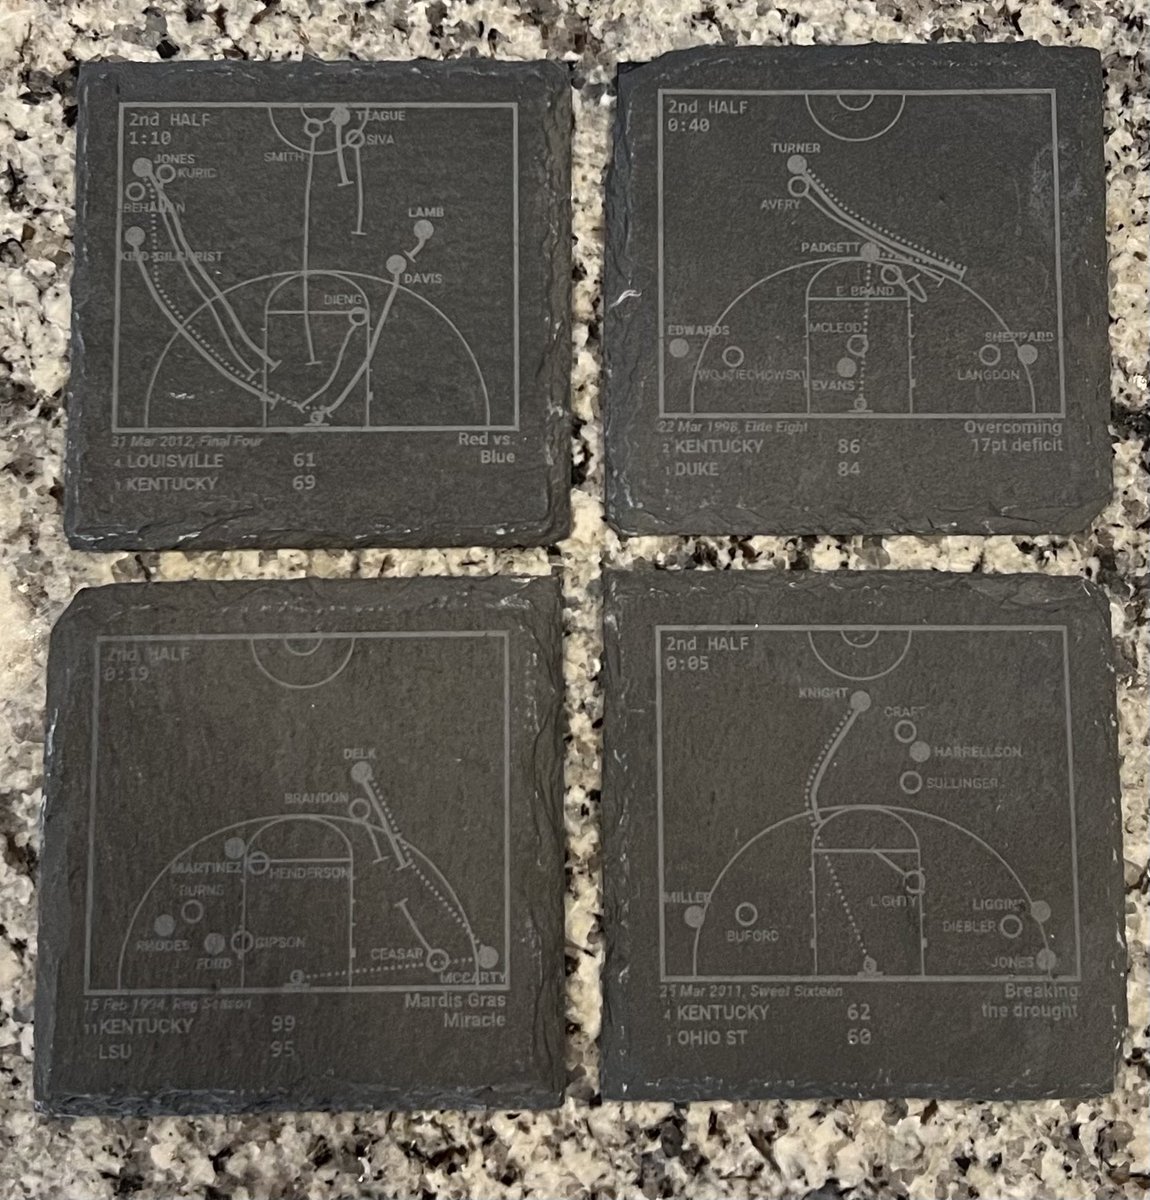 🚨GIVEAWAY🚨 We have partnered with Playbook Products to give away this awesome set of coasters commemorating four historic Kentucky basketball plays! One lucky #BBN member will win To enter: - RETWEET - FOLLOW @JackPilgrimKSR and @PlaybookProduct Giveaway ends 3/27 at 8 AM ET